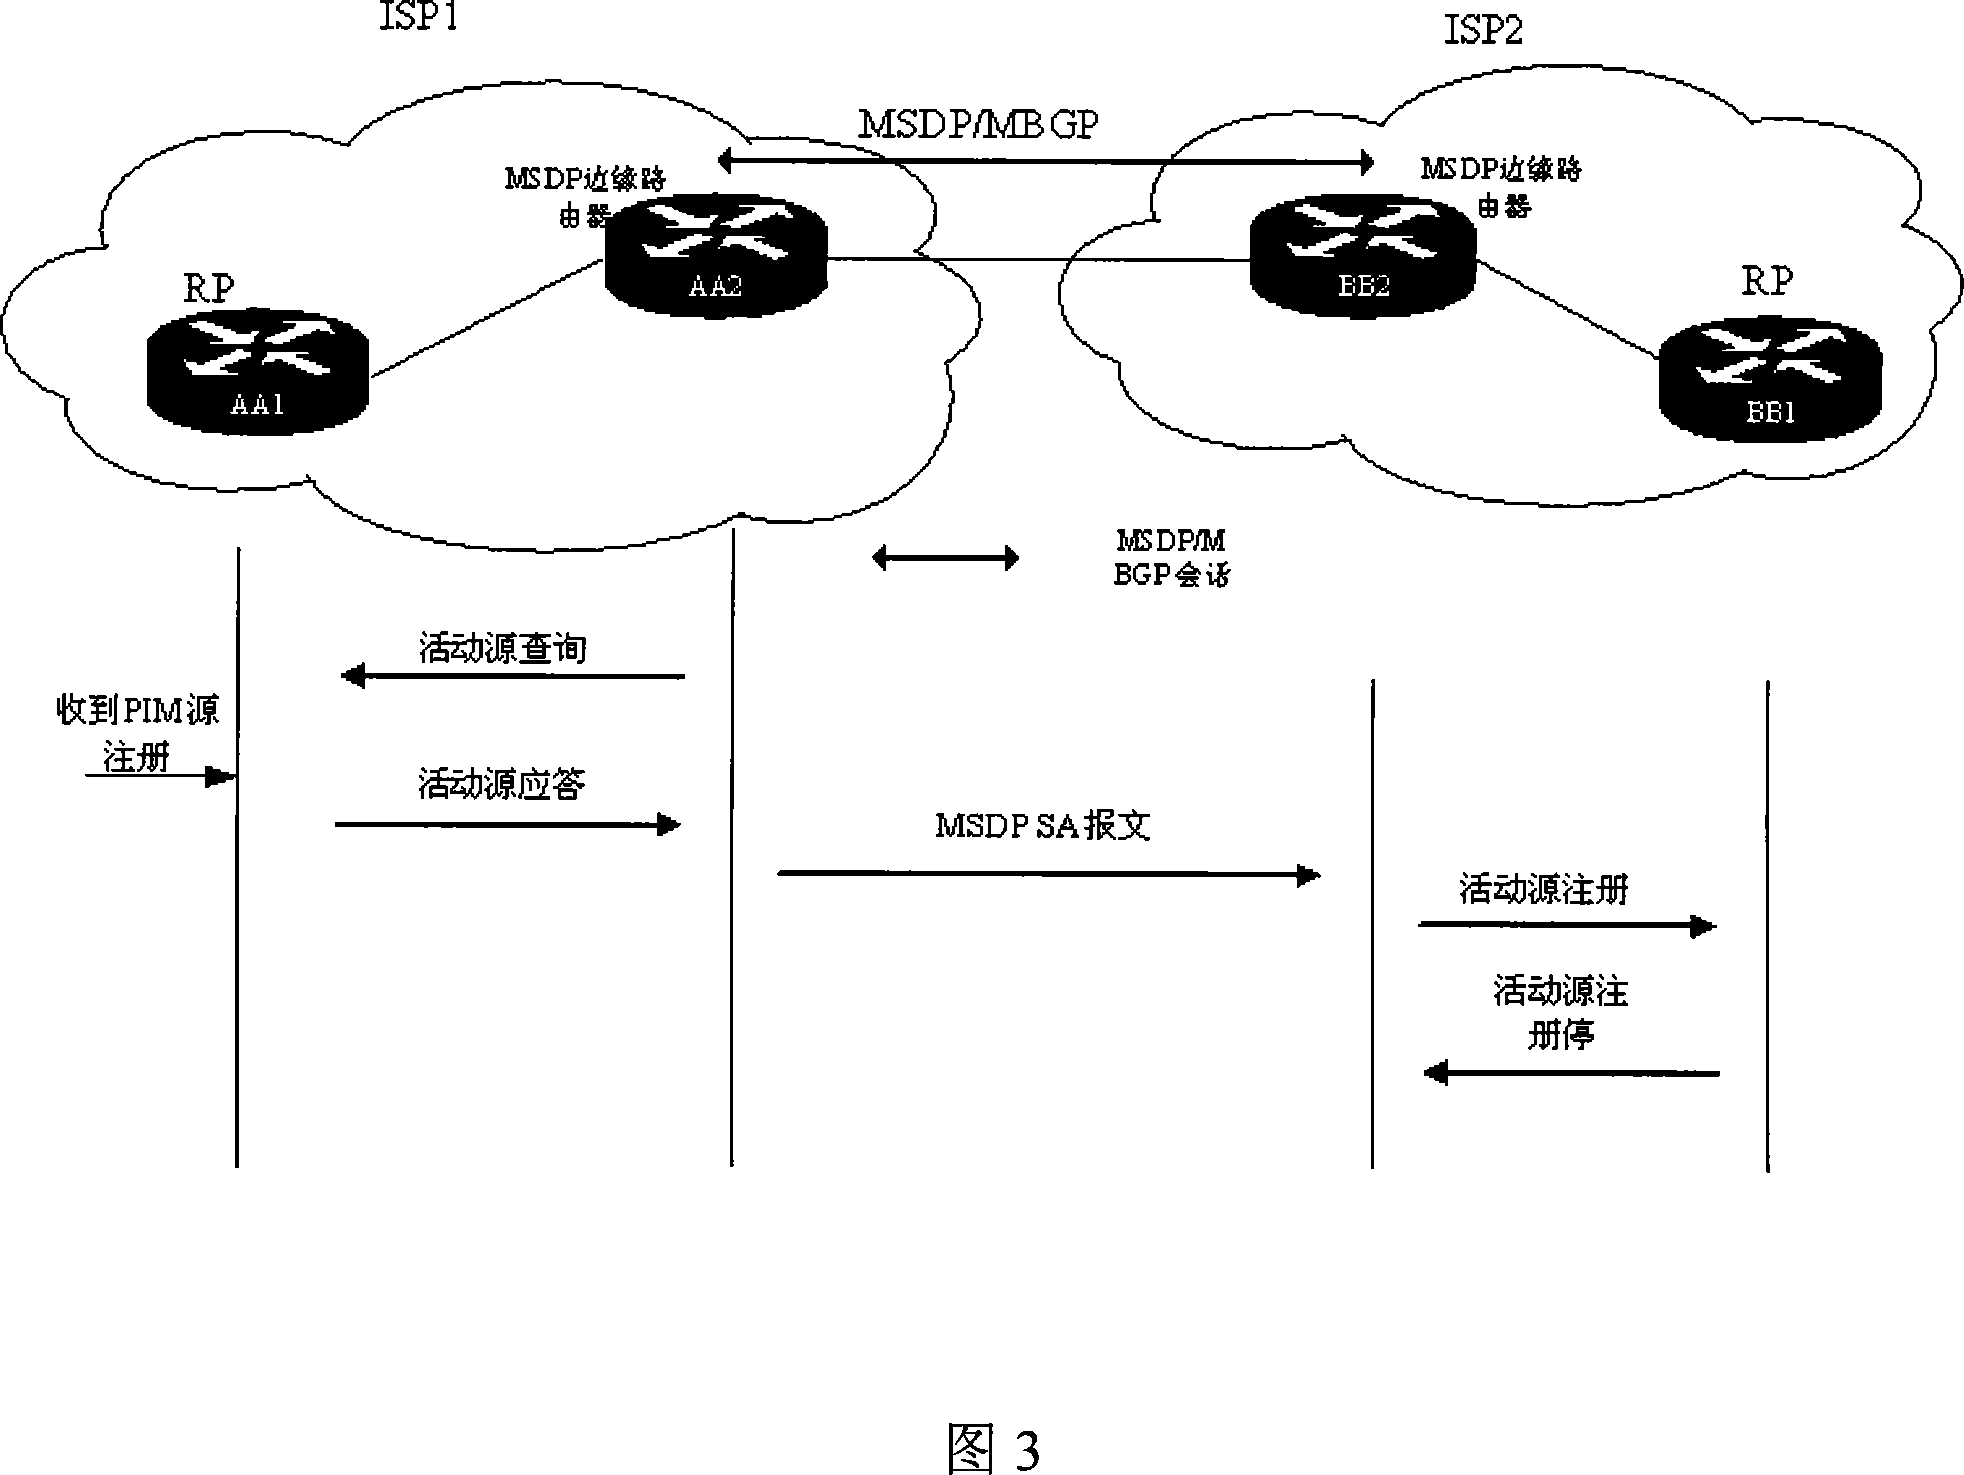 Method for notifying multicast source between MSDP and PIM